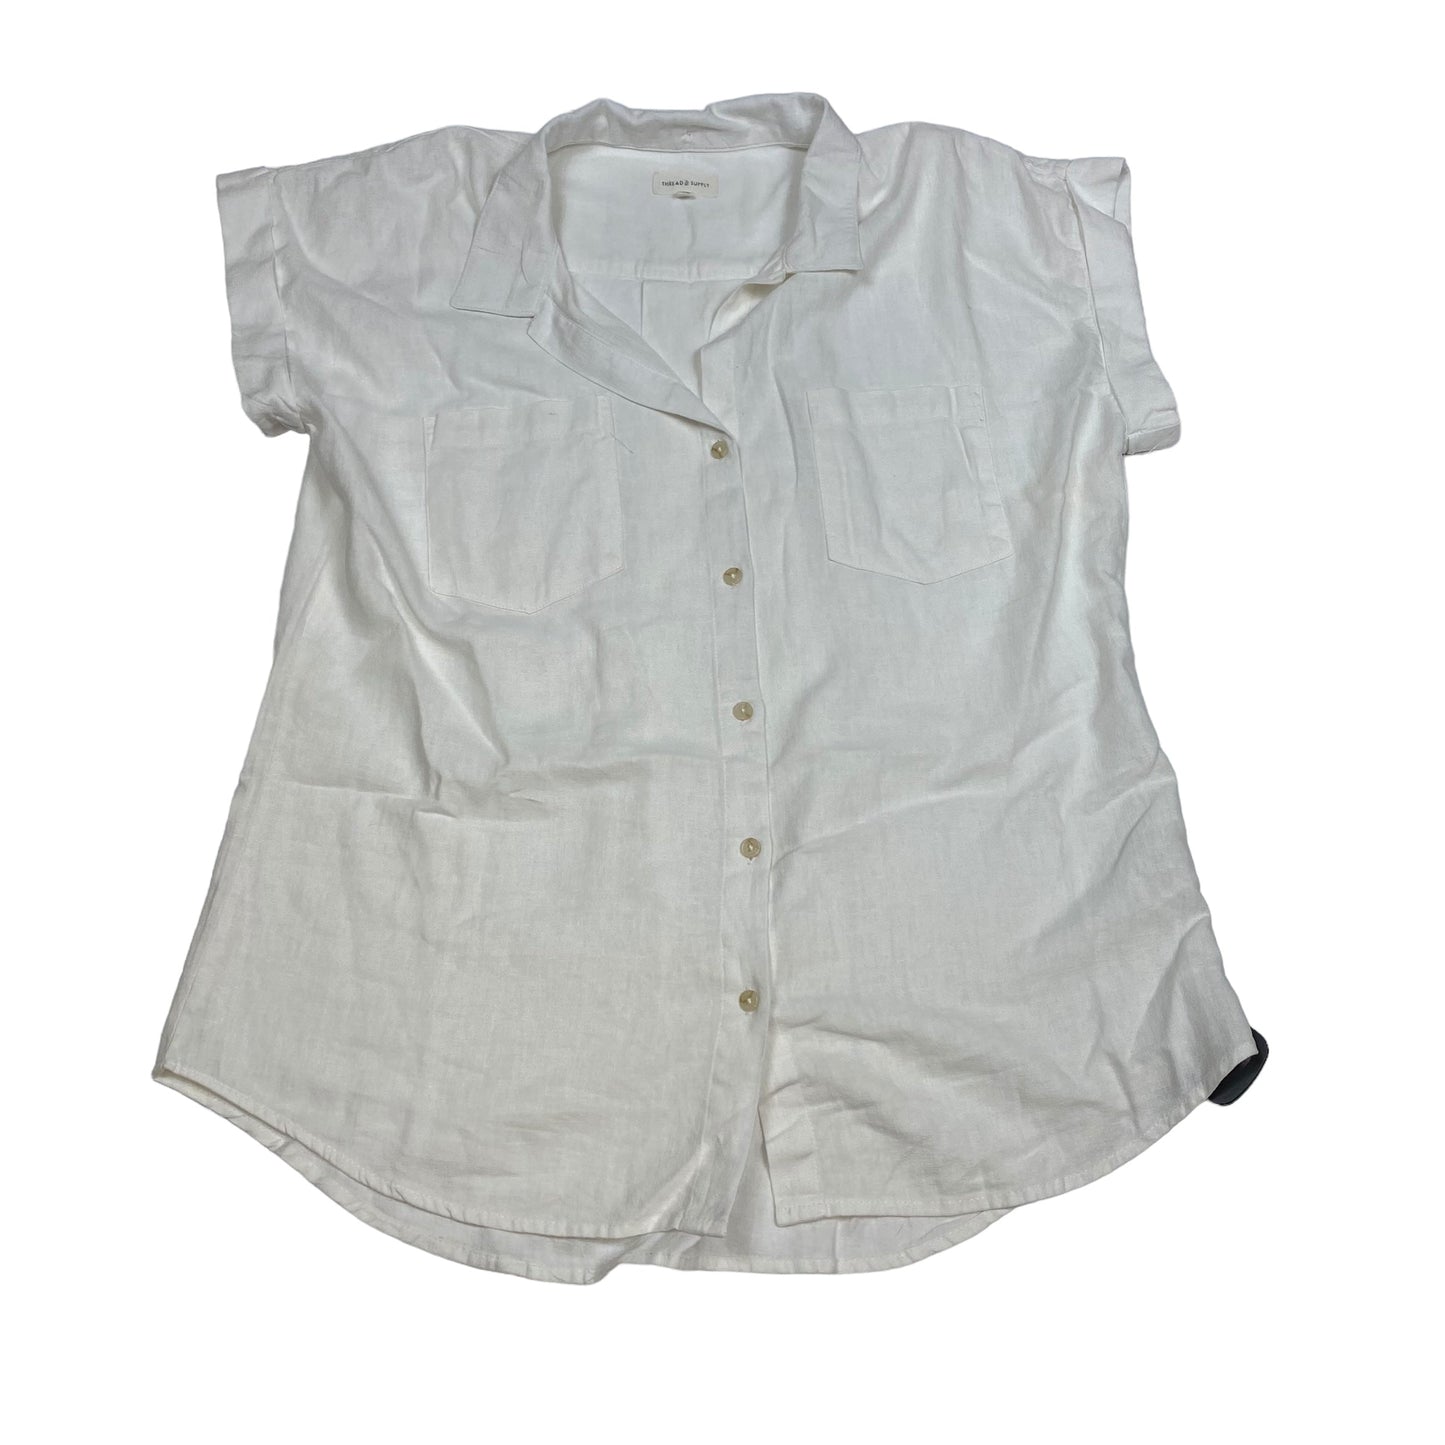 White Top Short Sleeve Thread And Supply, Size L